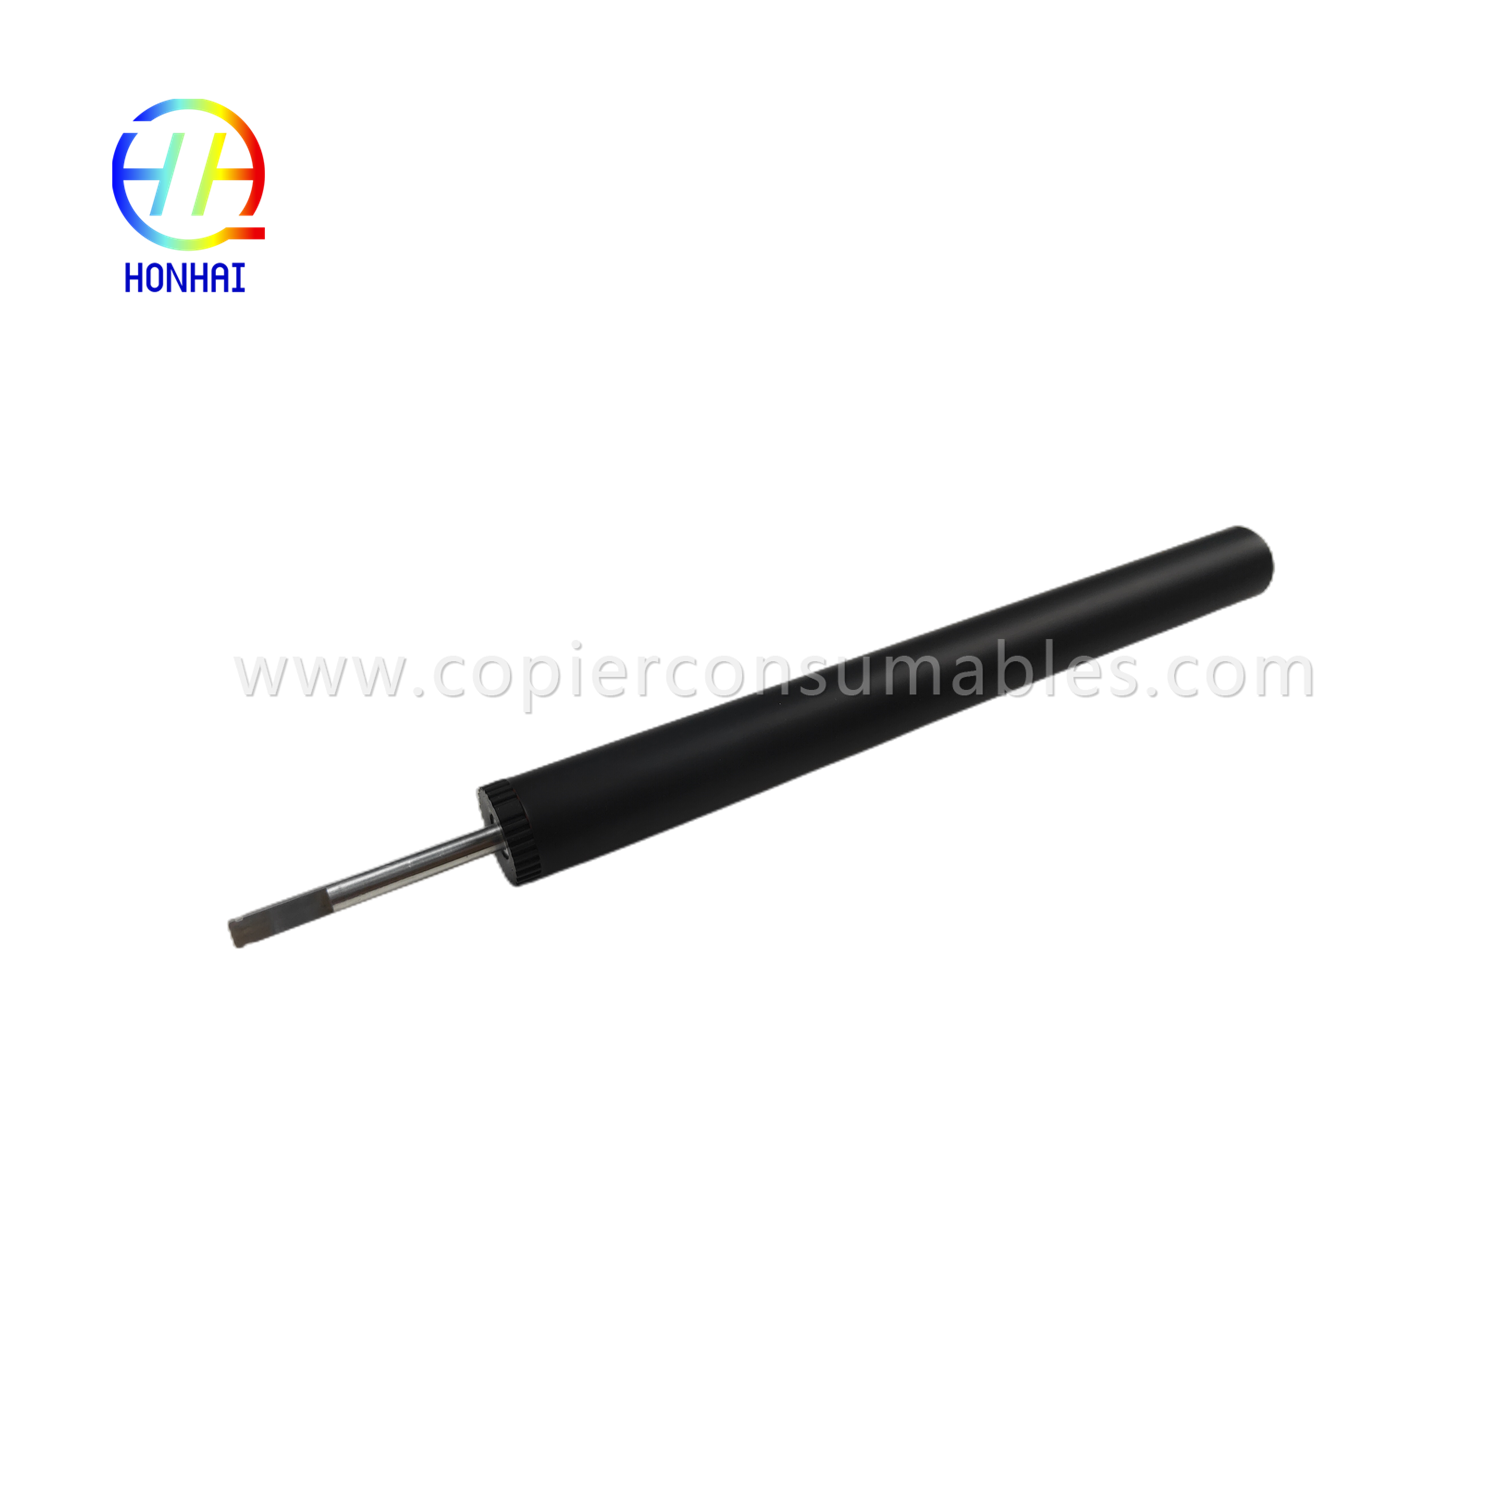 https://www.copierconsumables.com/lower-press-roller-for-canon-ir-1018-1019-1022-1023-1024-1025-lower-sleeved-press-roller-product/